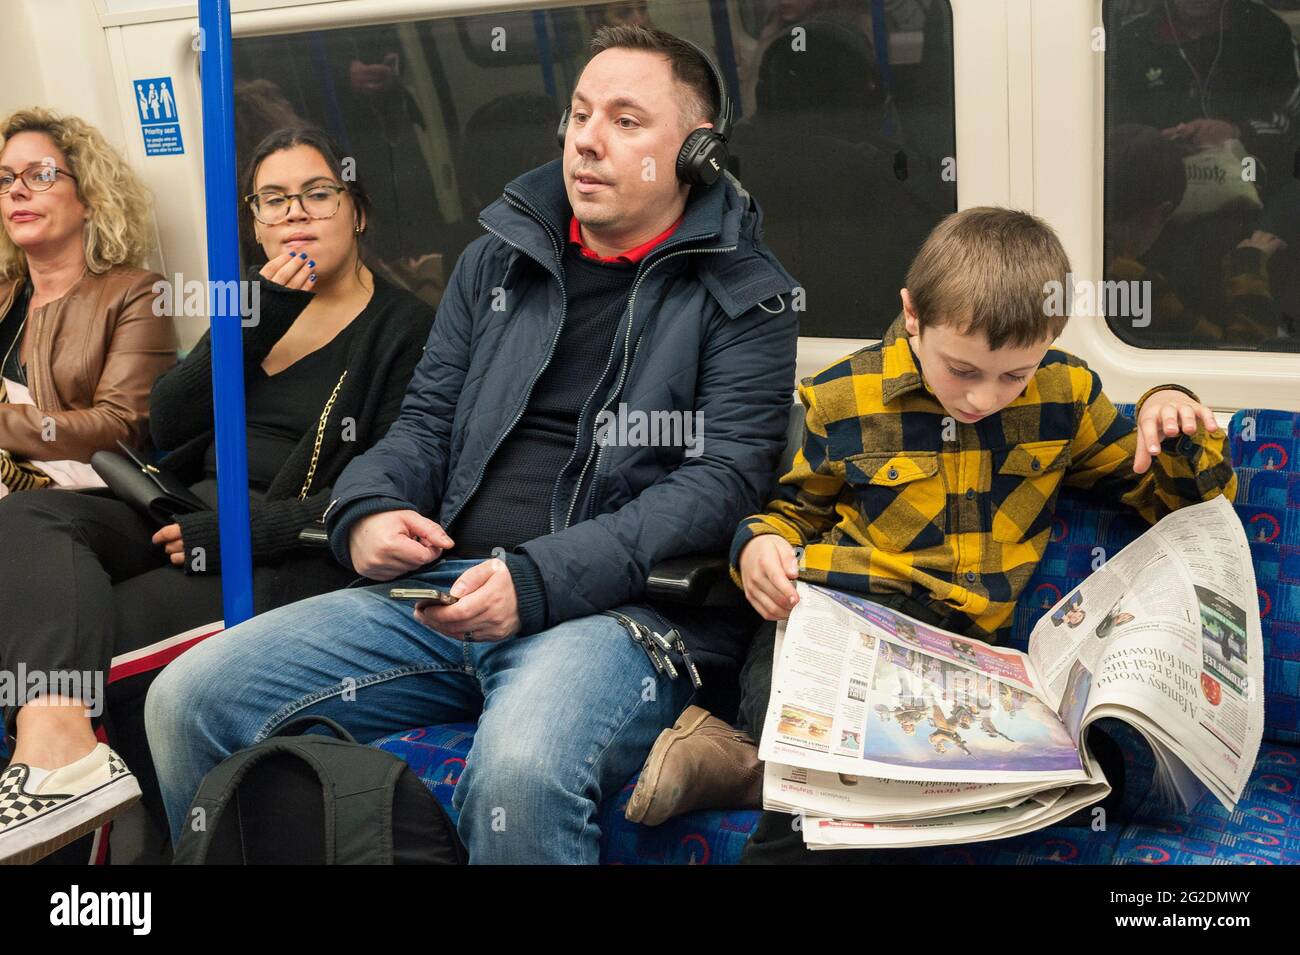 A boy sits on a london underground train and reads the paper. Stock Photo